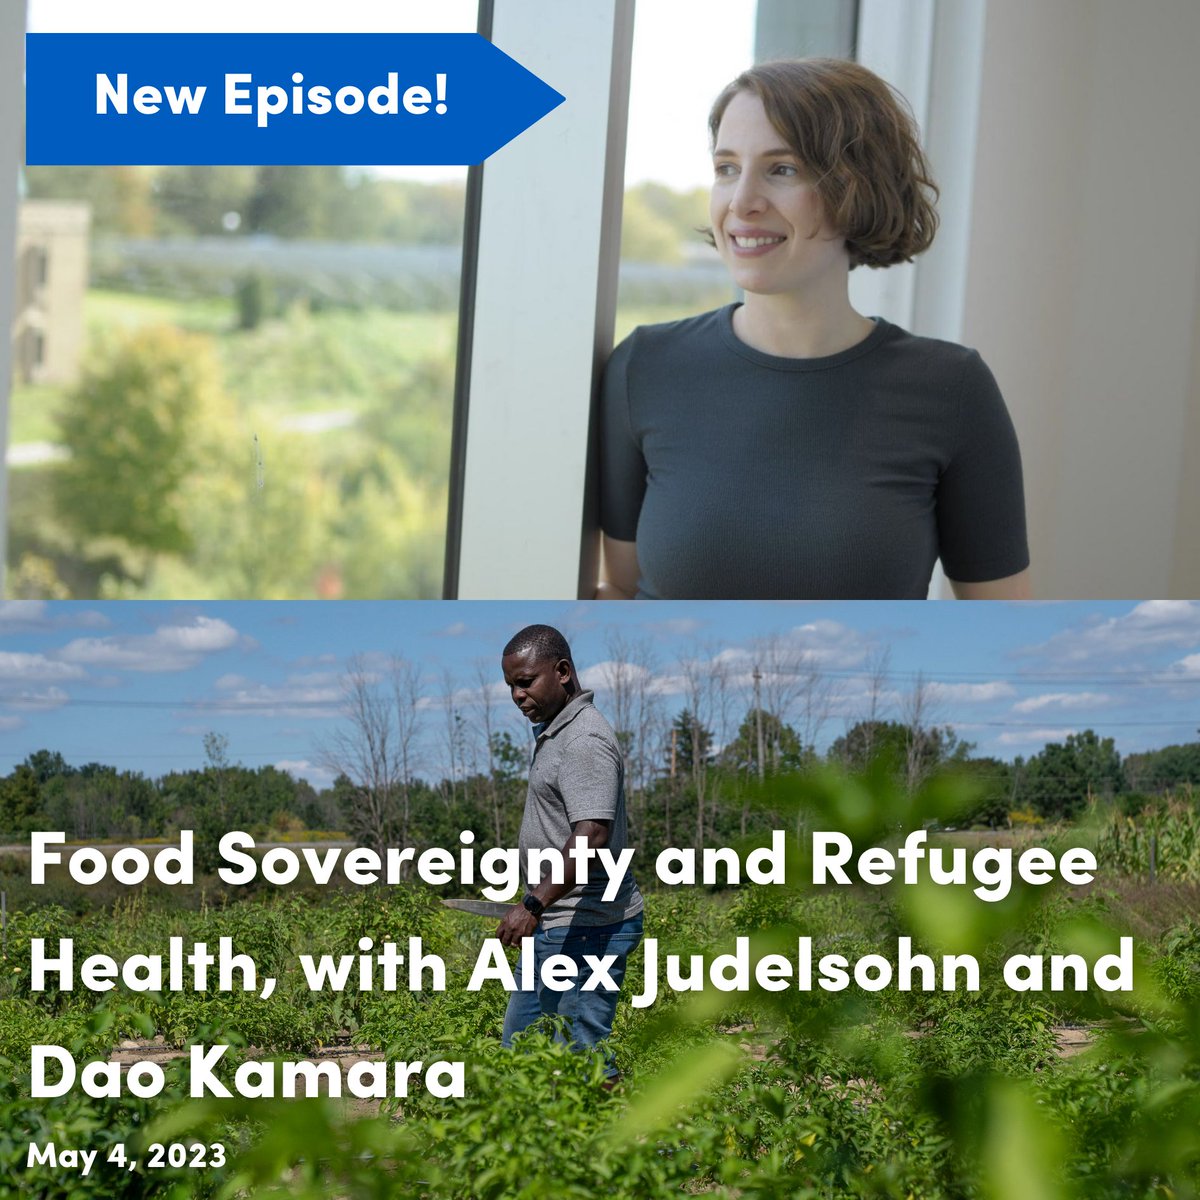 ⚠️New episode alert!⚠️

🎙Learn about food sovereignty and refugee health: buffalohealthcast.buzzsprout.com/1645006/127285…

#UBuffalo #UBPublicHealth #UBSPHHP #FoodSovereignty #RefugeeHealth #HealthEquity #PublicHealth #Podcast @ubsphhp @buffaloarchplan